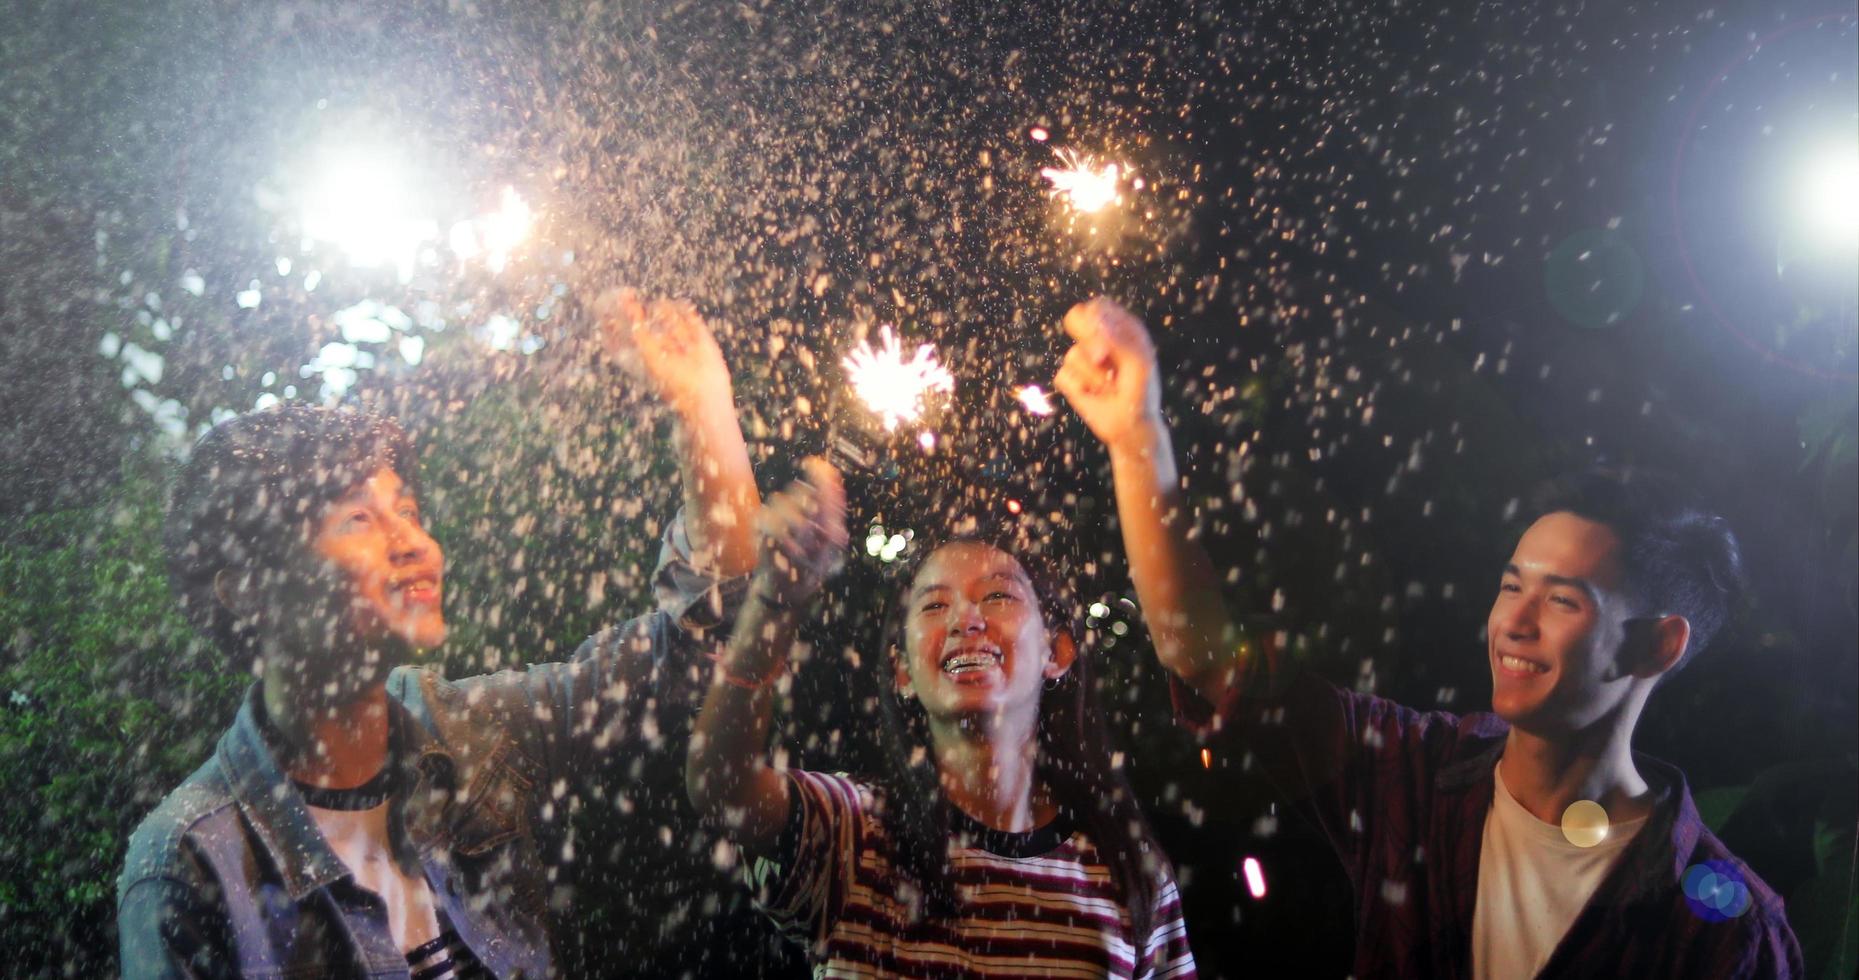 Asian group of friends having outdoor garden barbecue laughing with alcoholic beer drinks and showing group of friends having fun with sparklers on night ,soft focus photo